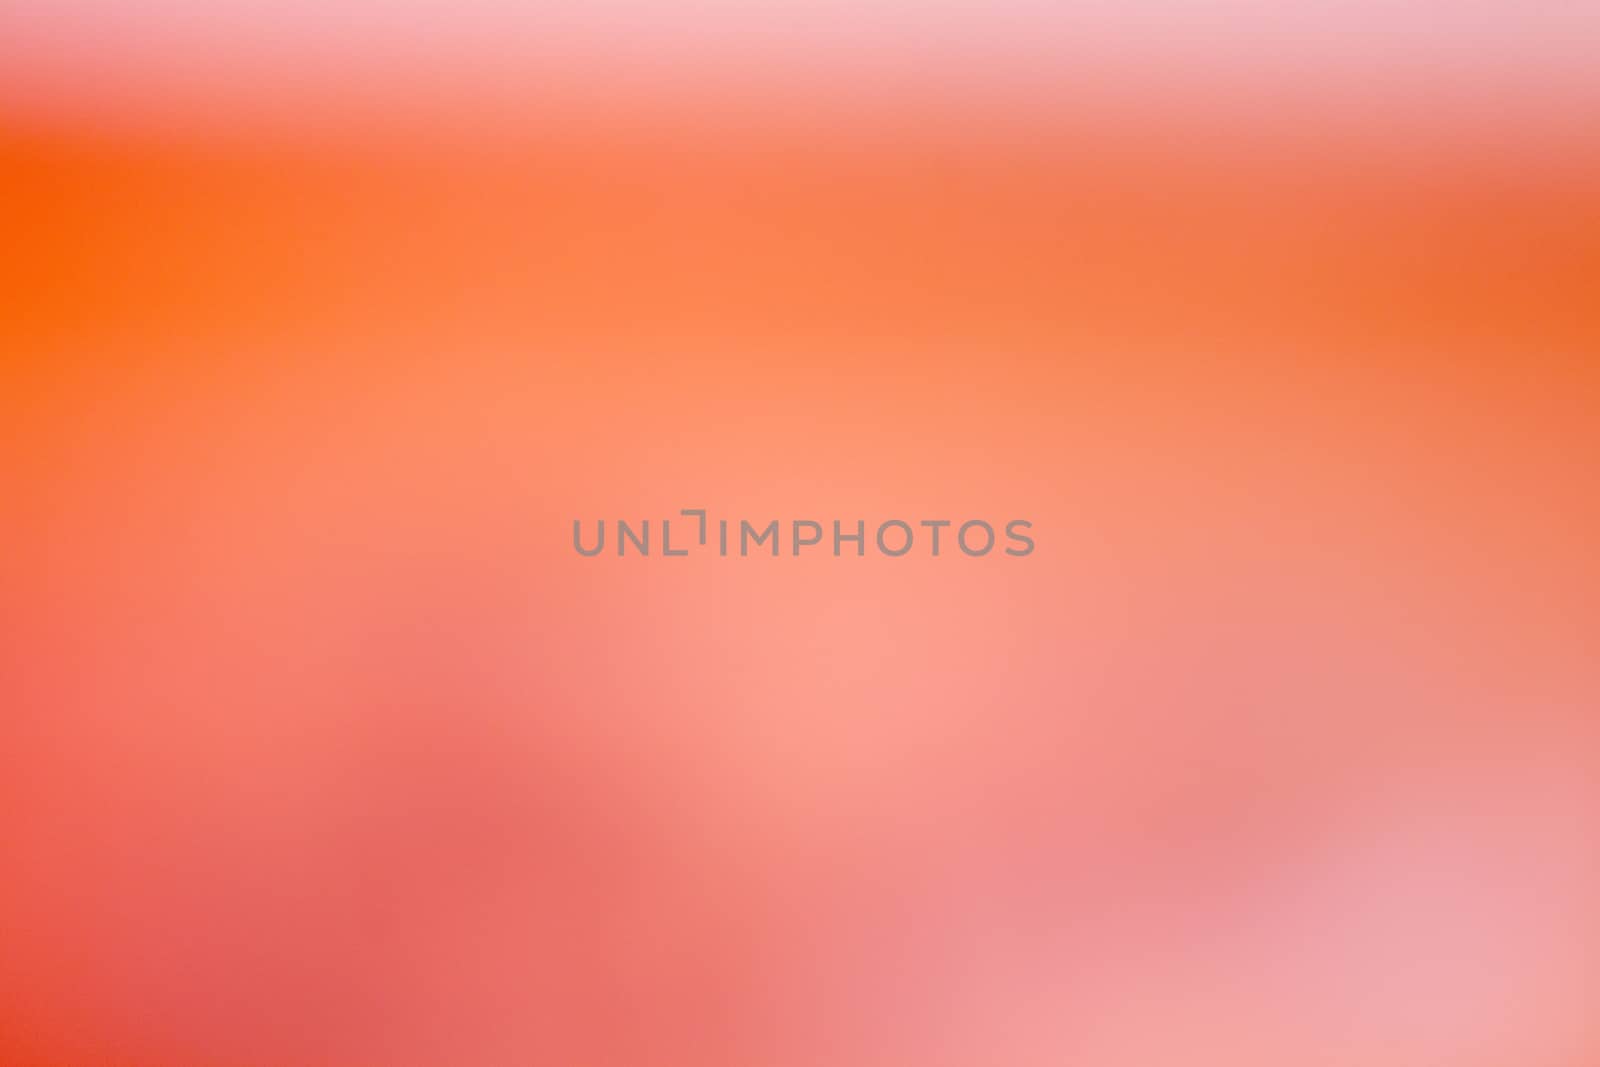 A Photographic Creation of Diffuse Blurry Formless Abstract Background of Orange Hues